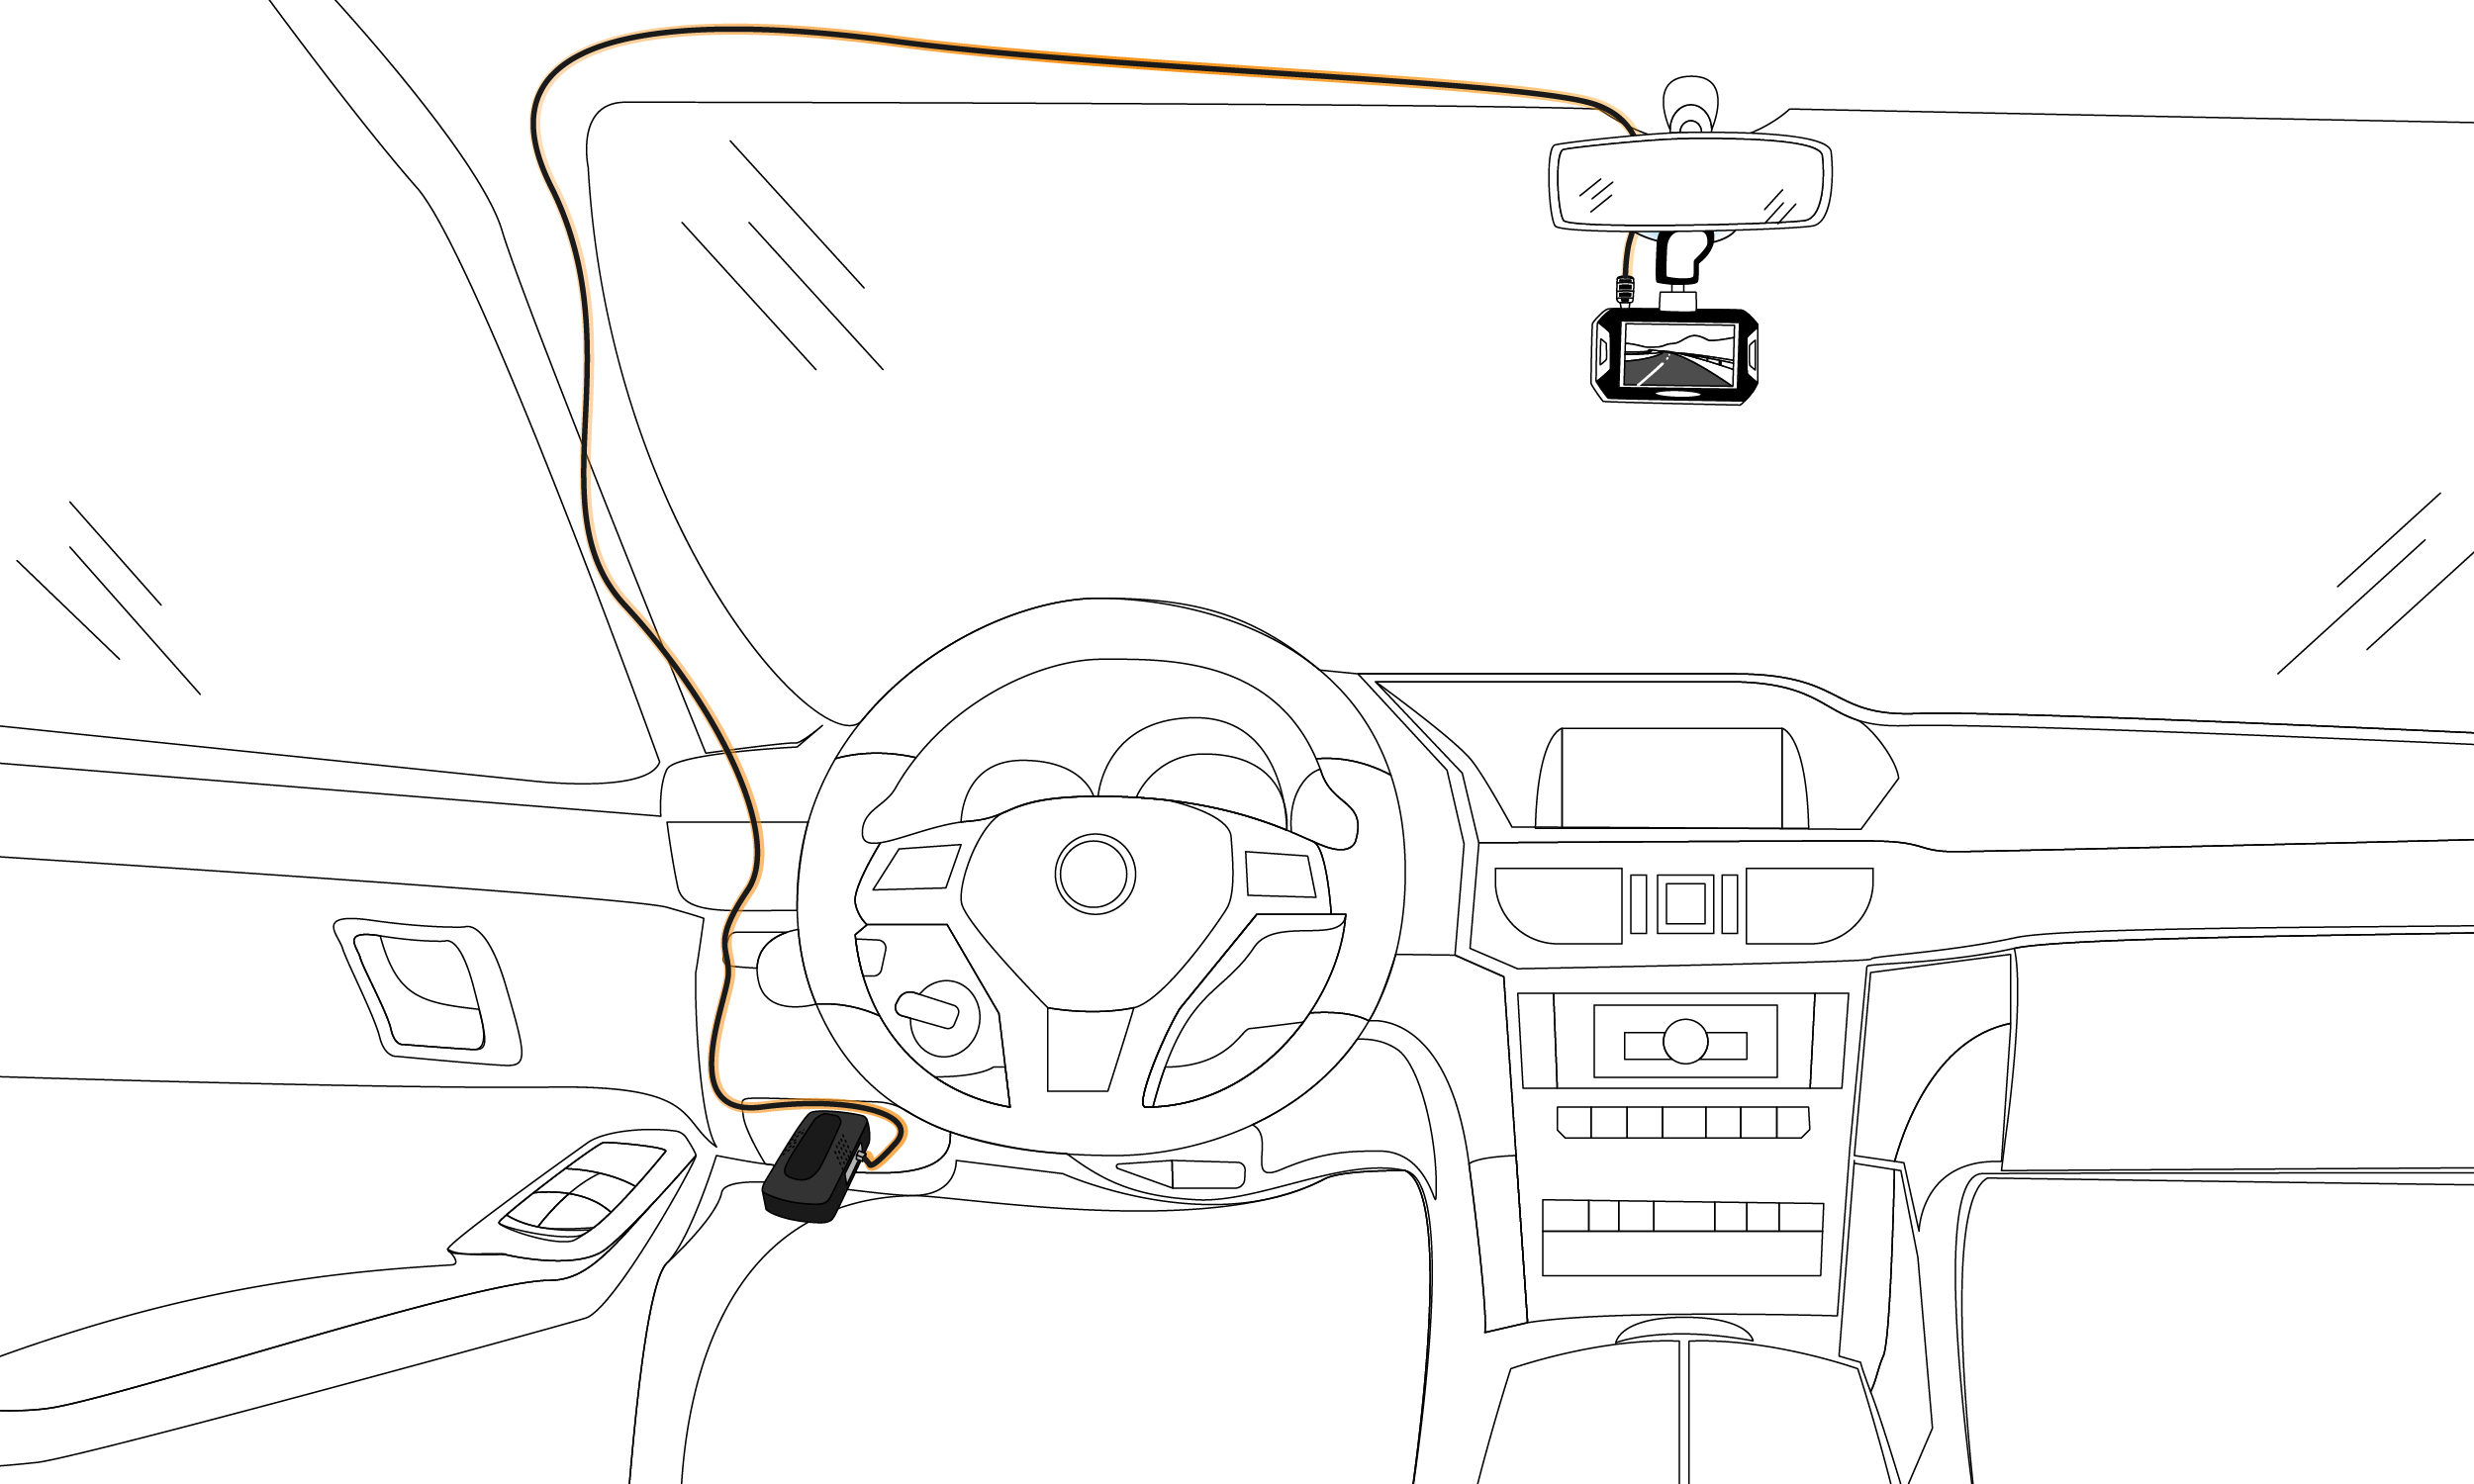 An illustration of a dash cam installation in a vehicle